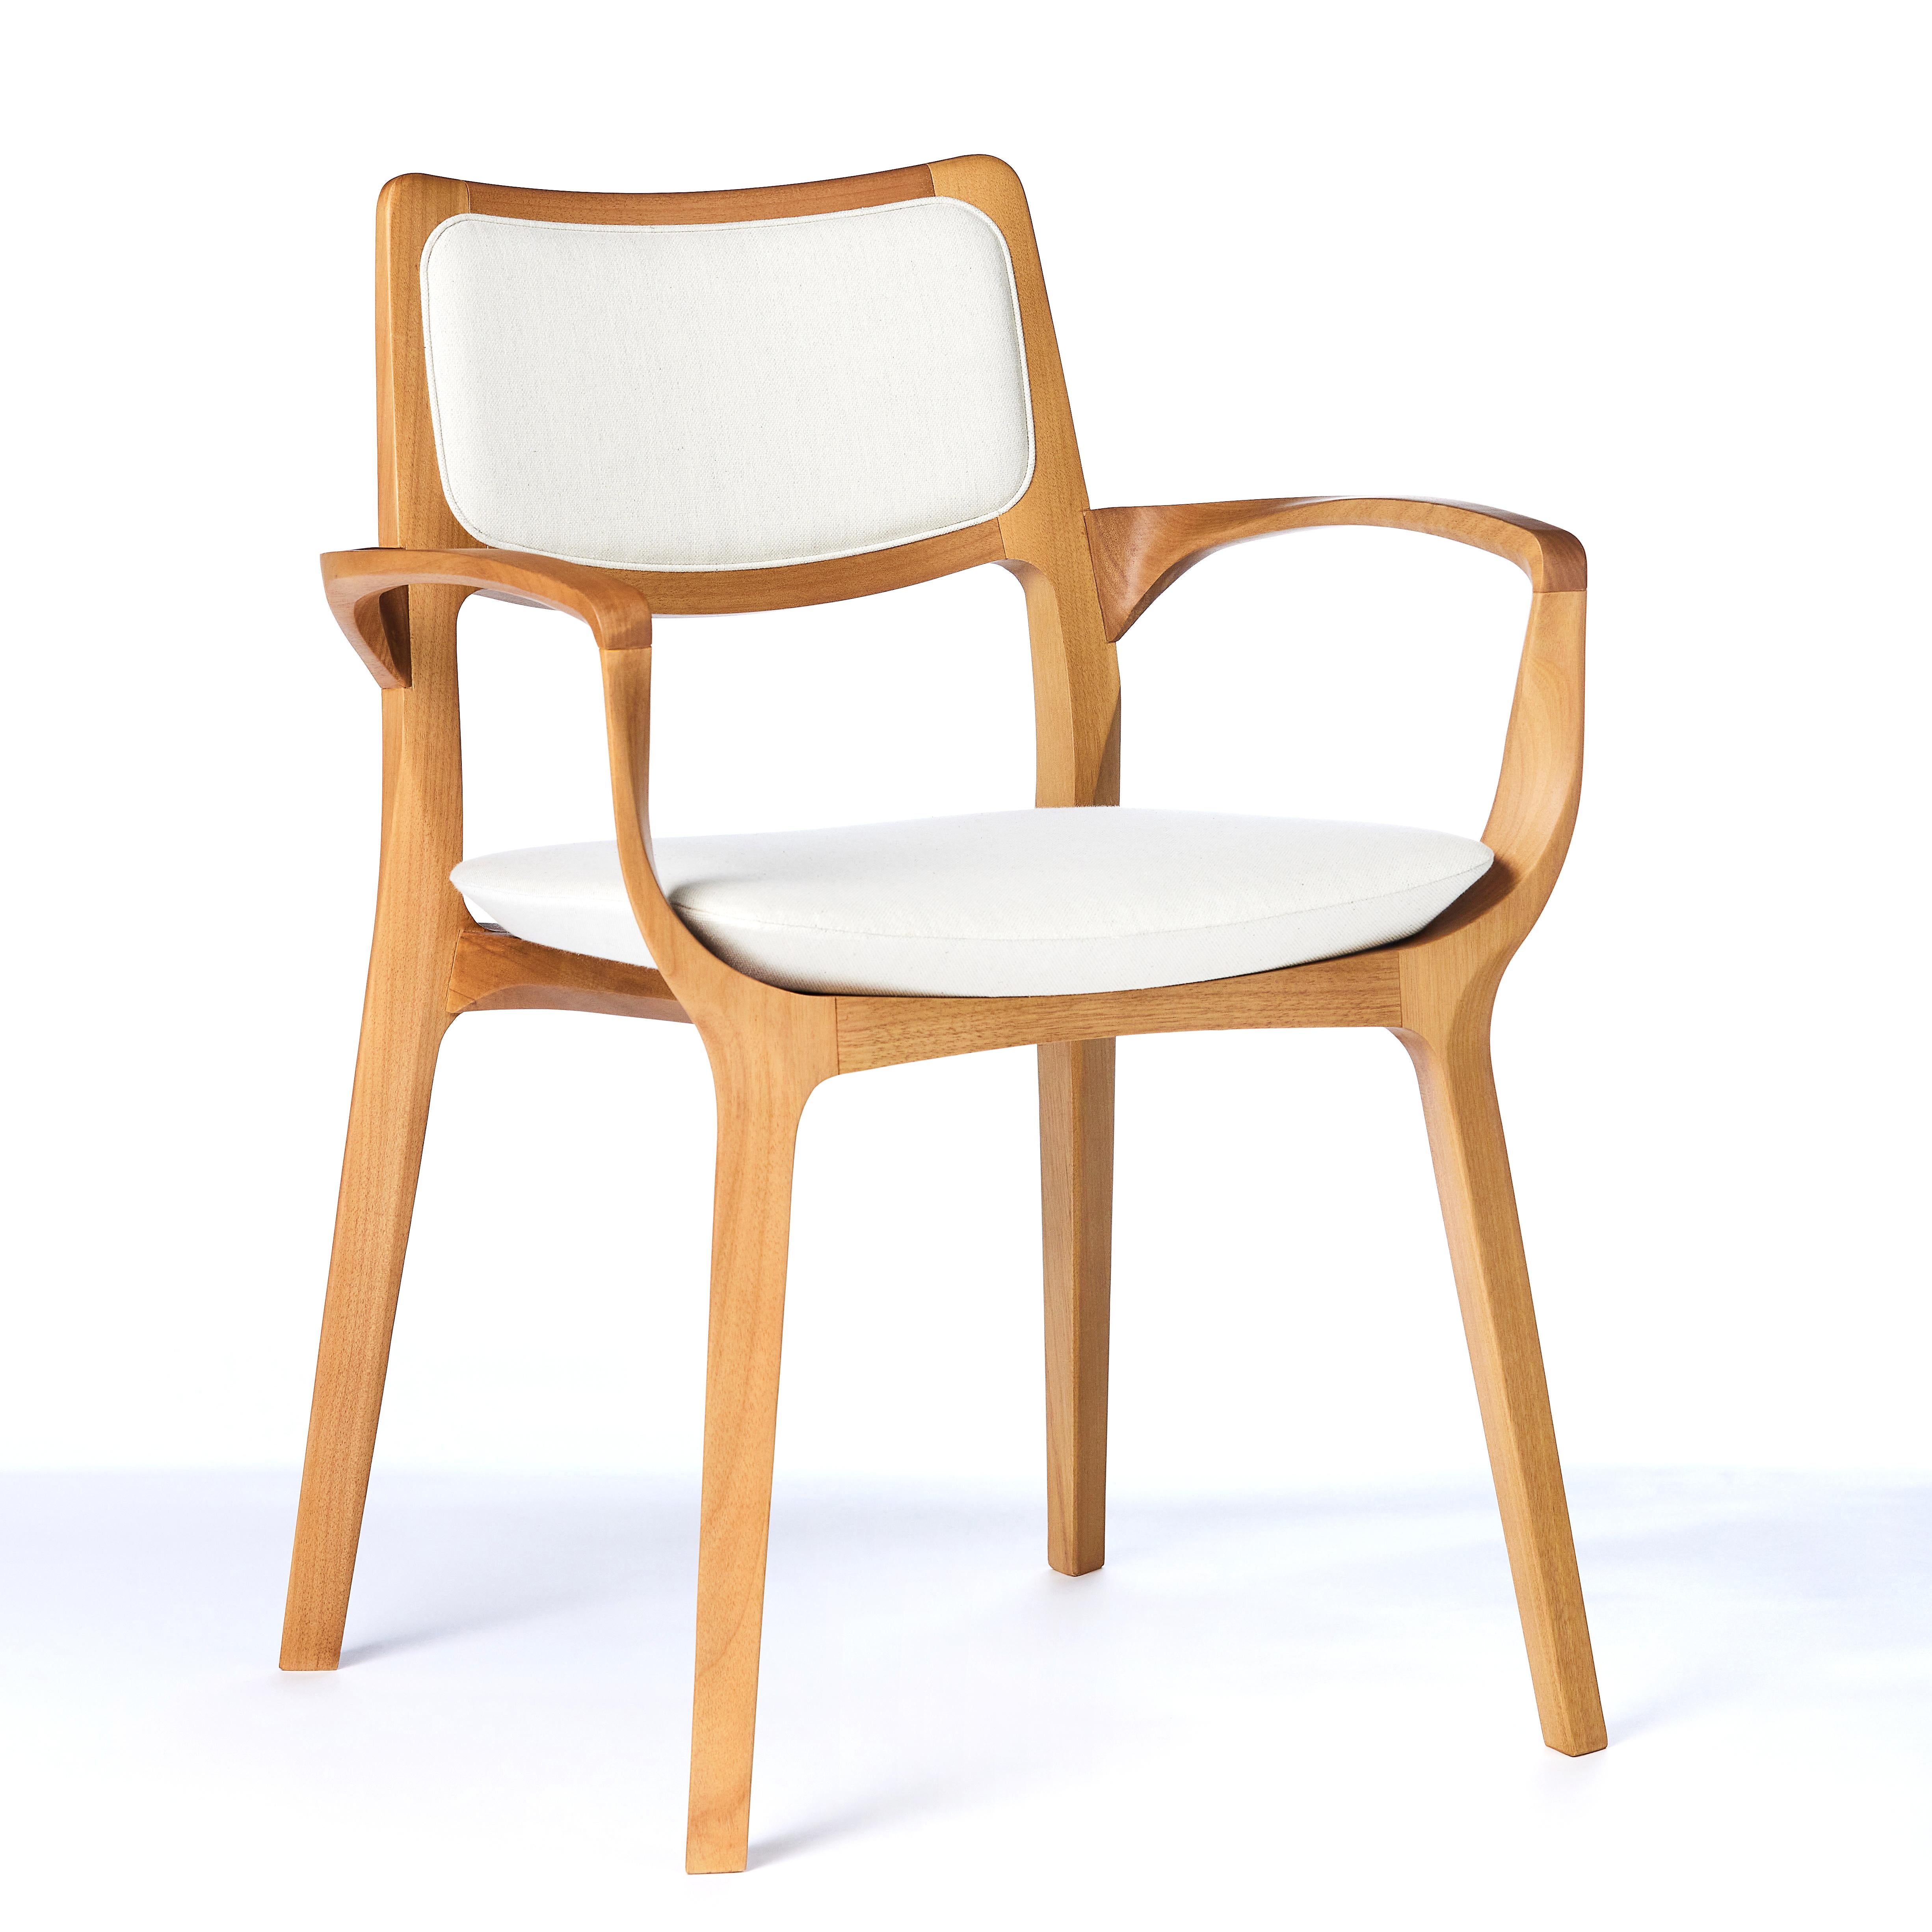 Post-Modern Style Aurora Chair in honey solid wood, vegan leather seating For Sale 4